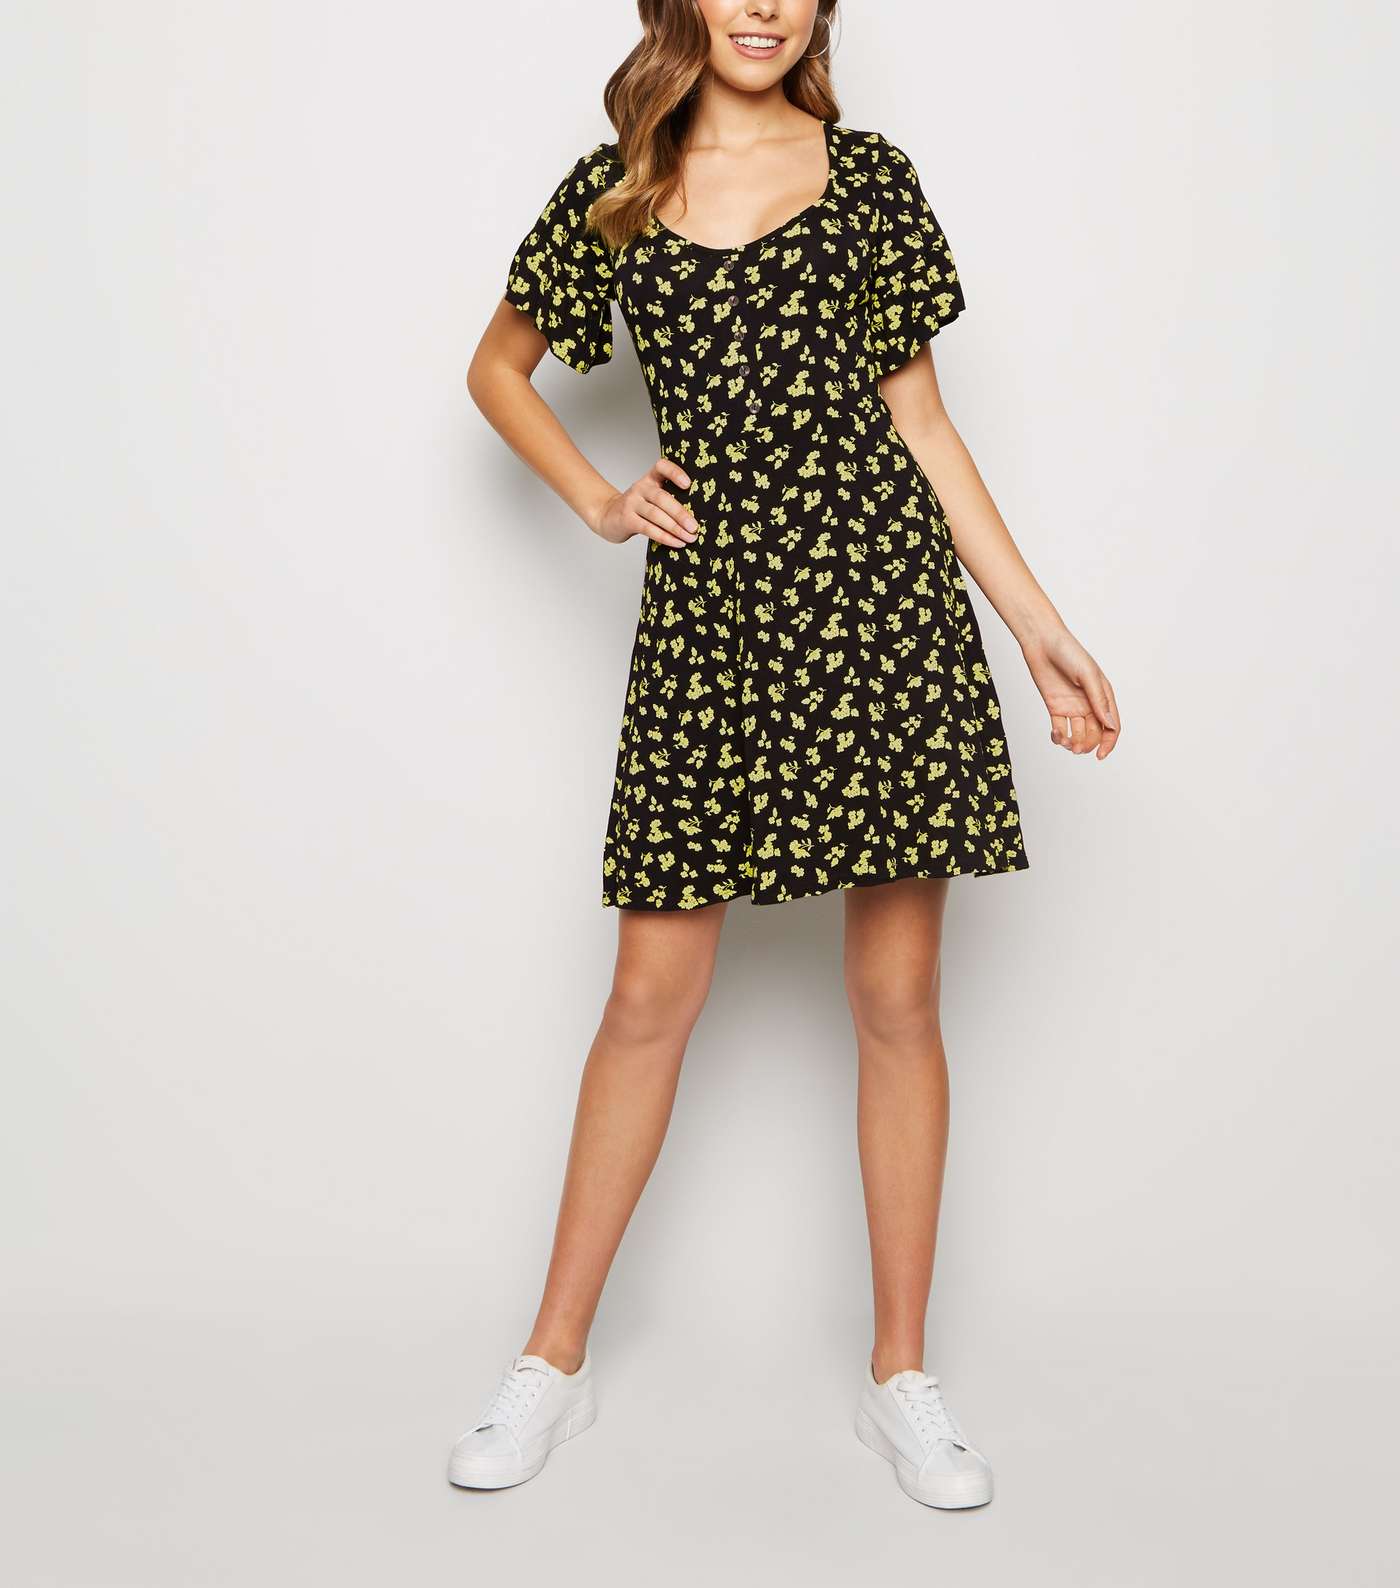 Cameo Rose Black Ditsy Floral Ruffle Sleeve Dress Image 2